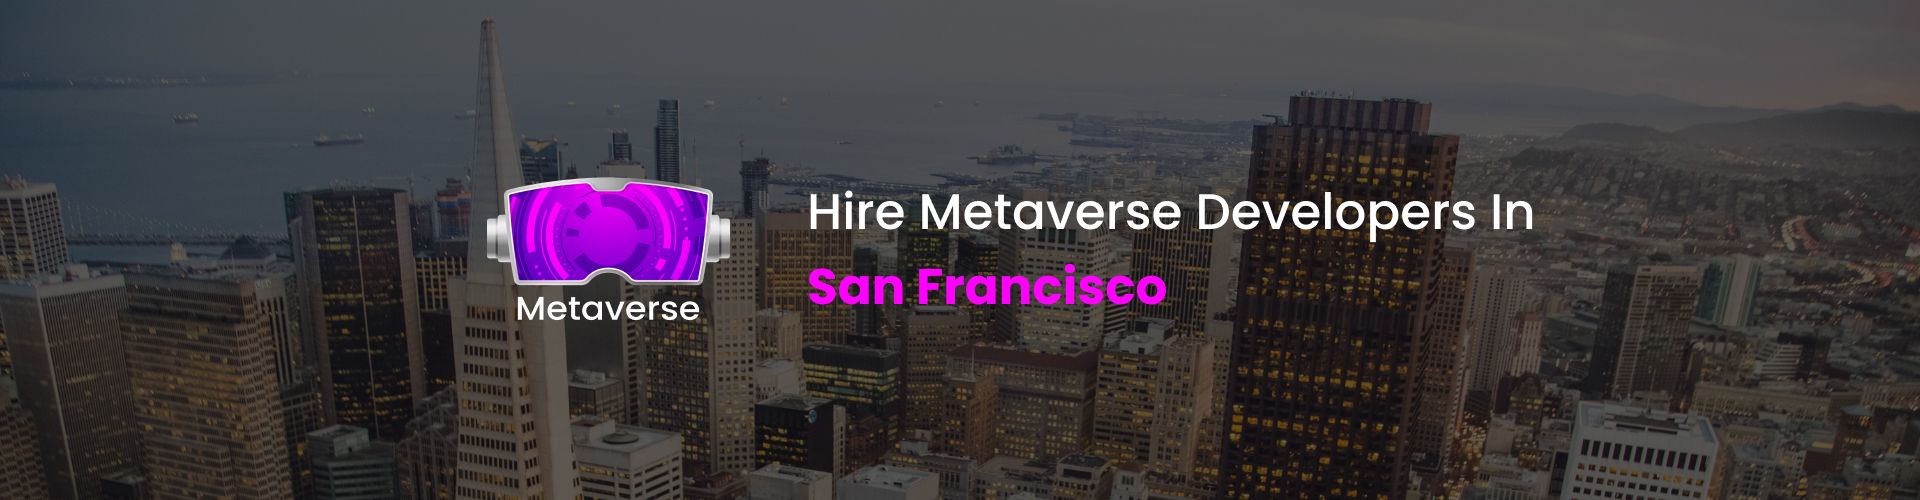 hire metaverse developers in san francisco